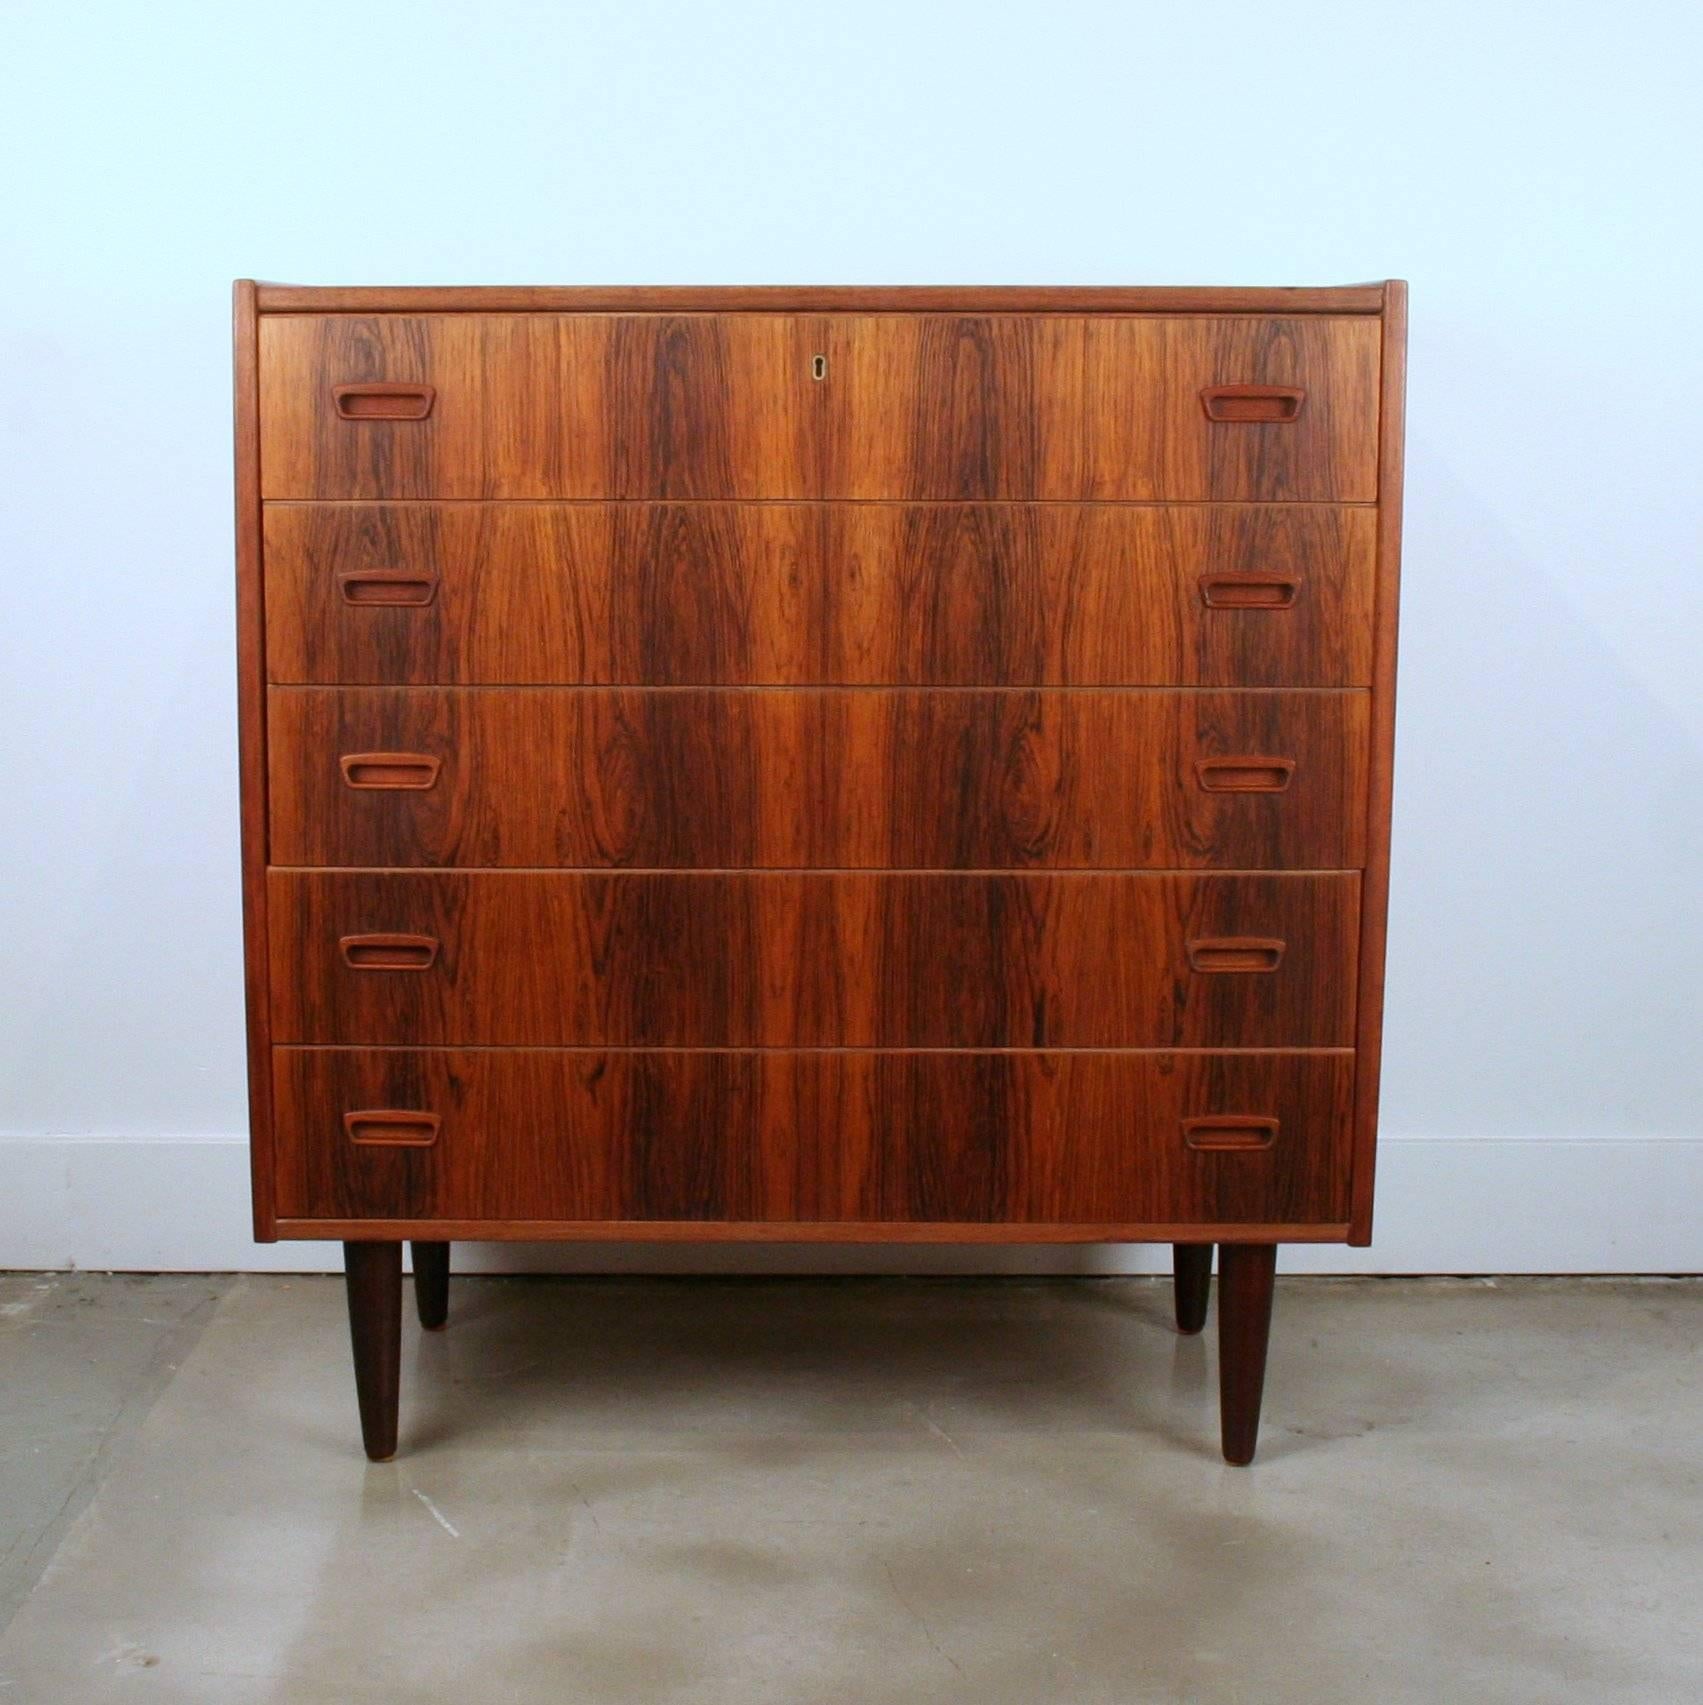 Vintage rosewood five-drawer dresser with exquisite graining throughout. Each drawer features two inset pulls and are constructed with dovetail joints. Set on four conical legs. Made in Denmark.